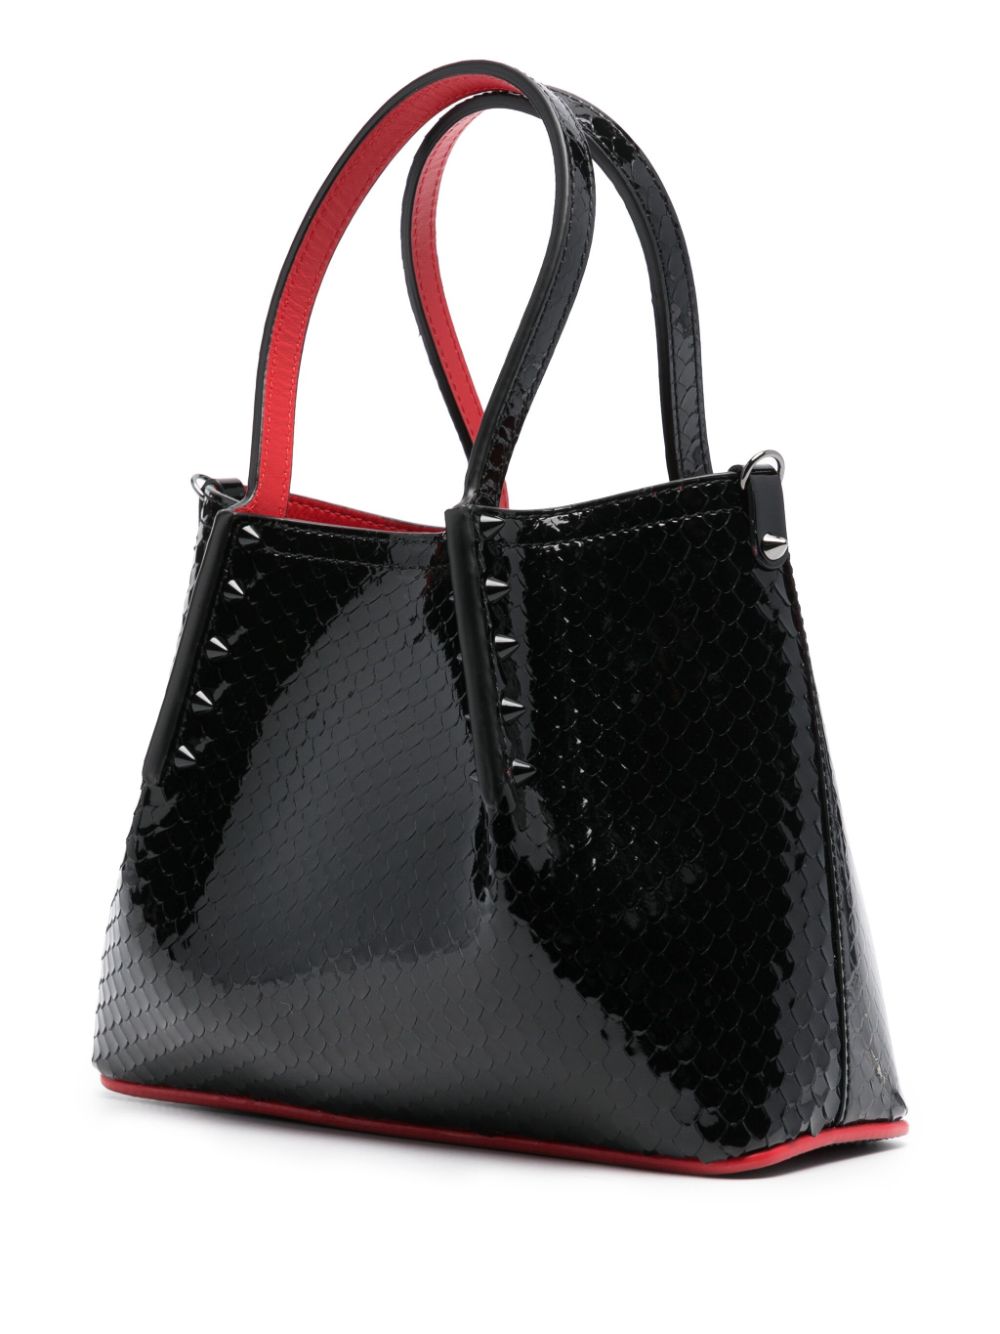 CHRISTIAN LOUBOUTIN Mini Cabarock Patent Leather Tote with Alligator Emboss and Tonal Studs - Black